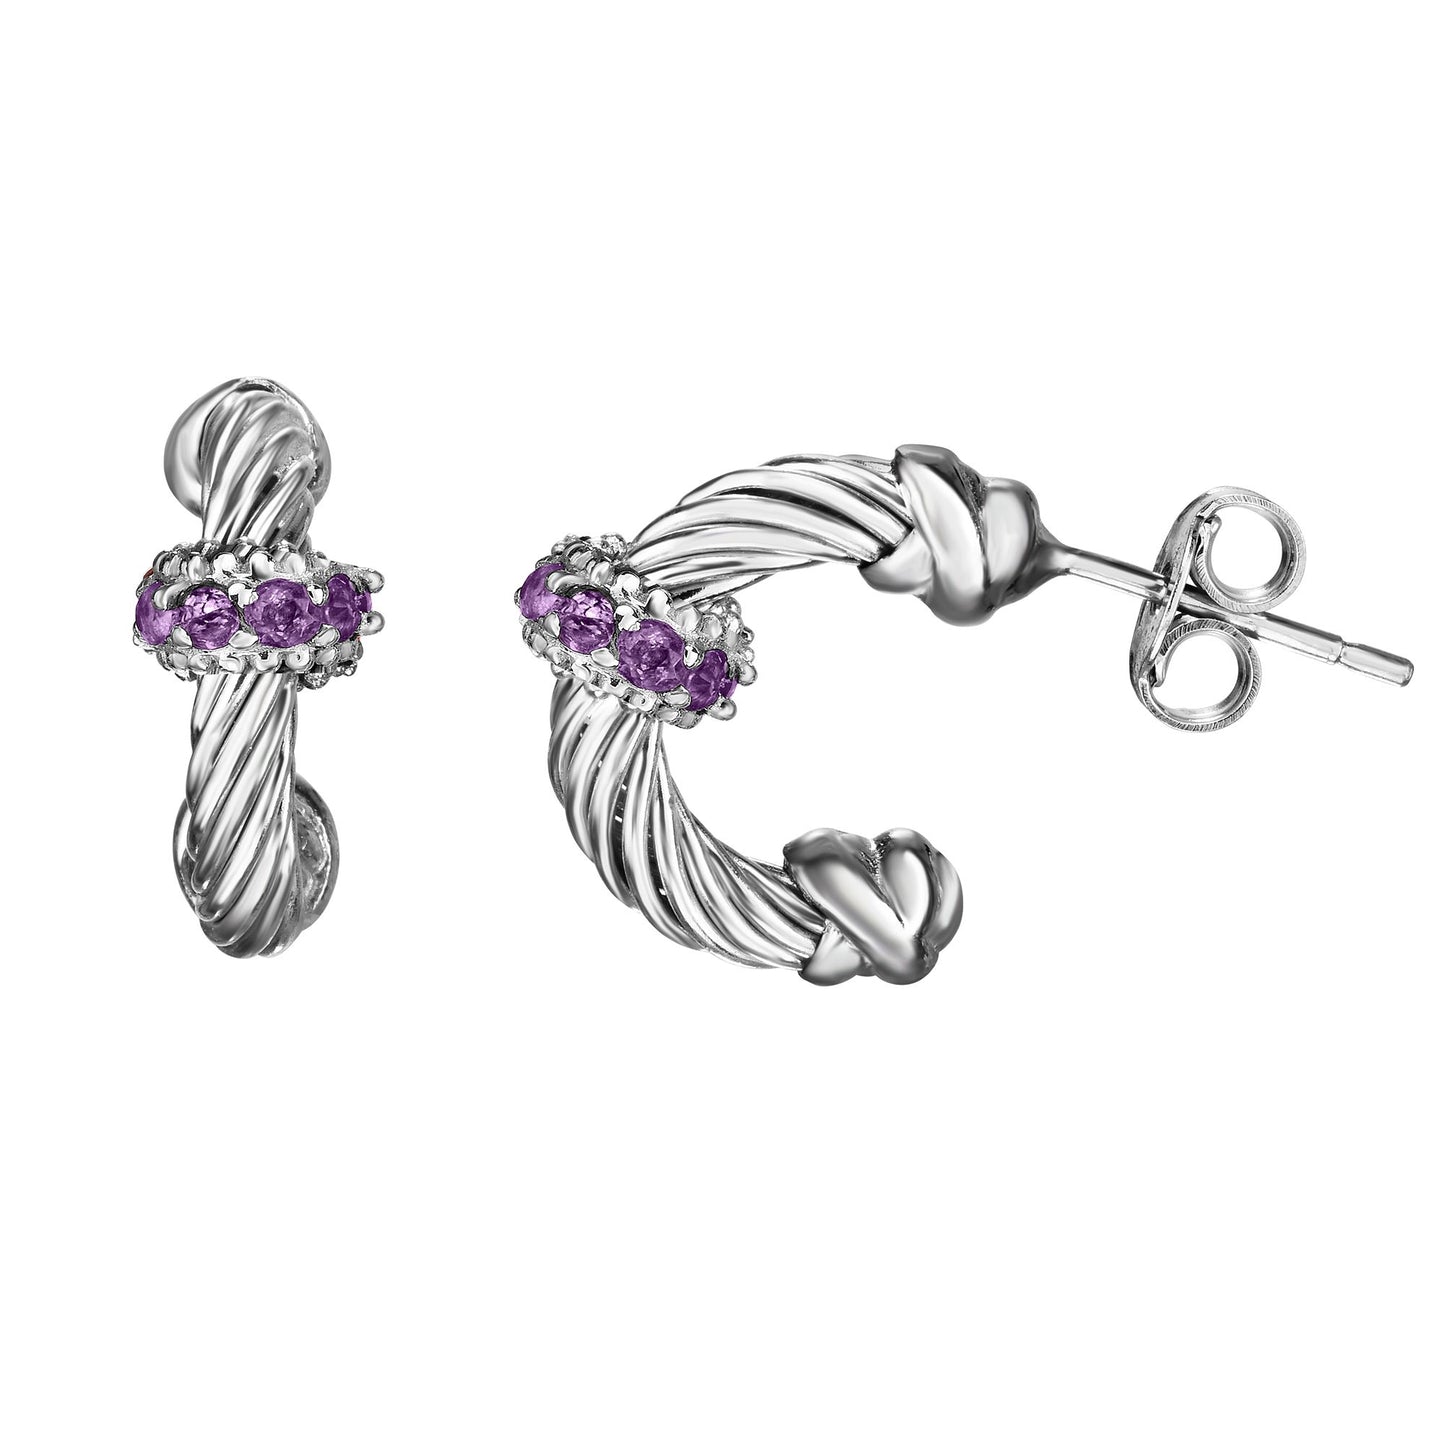 Sterling Silver with Rhodium Finish 6.2x16mm Shiny Twisted Round Tube Drop Fancy Earring with Push Back Clasp 0.5000ct 2mm Round Amethyst